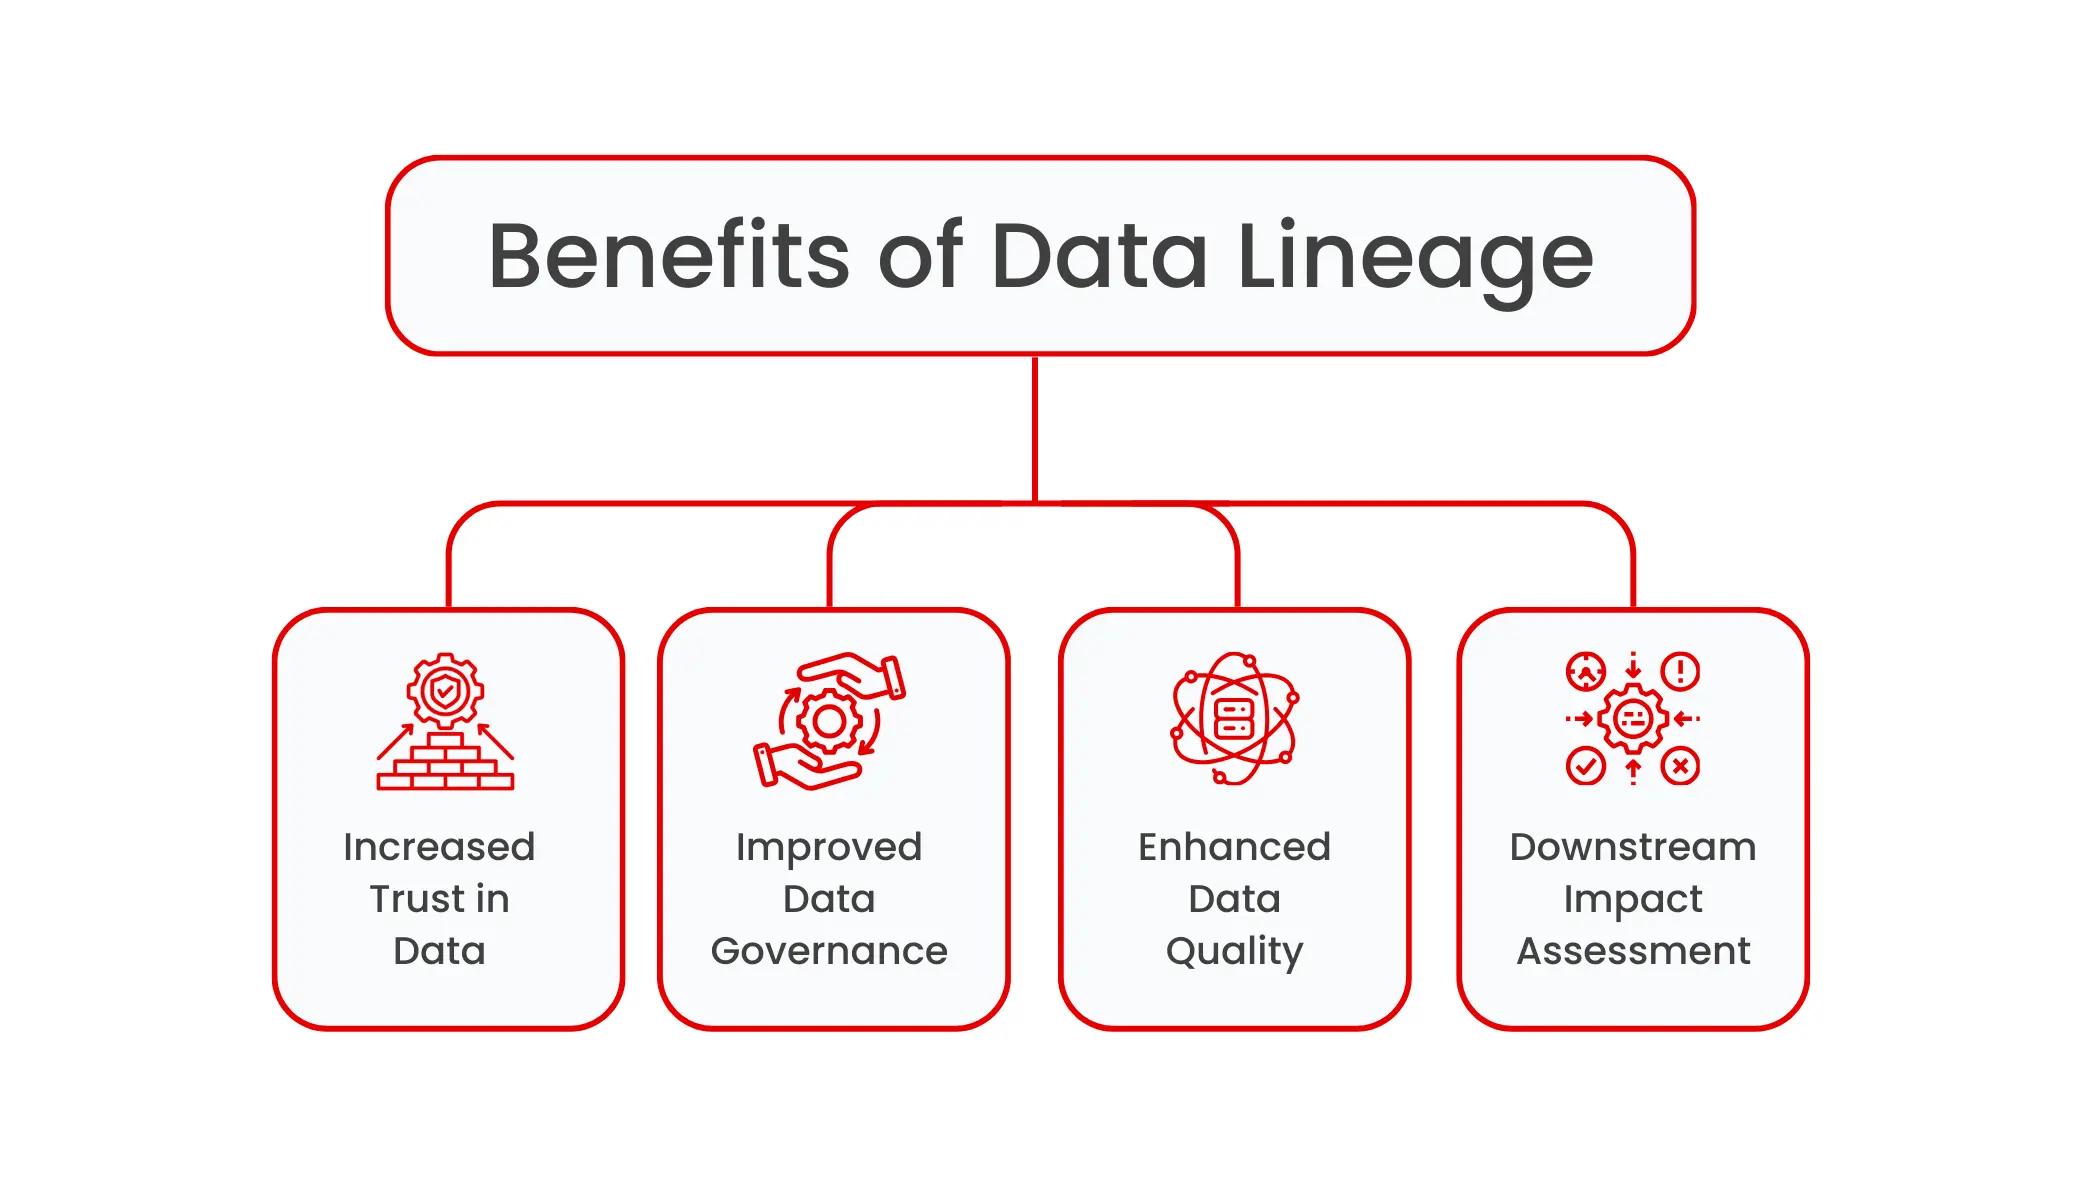 Benefits of Data lineage